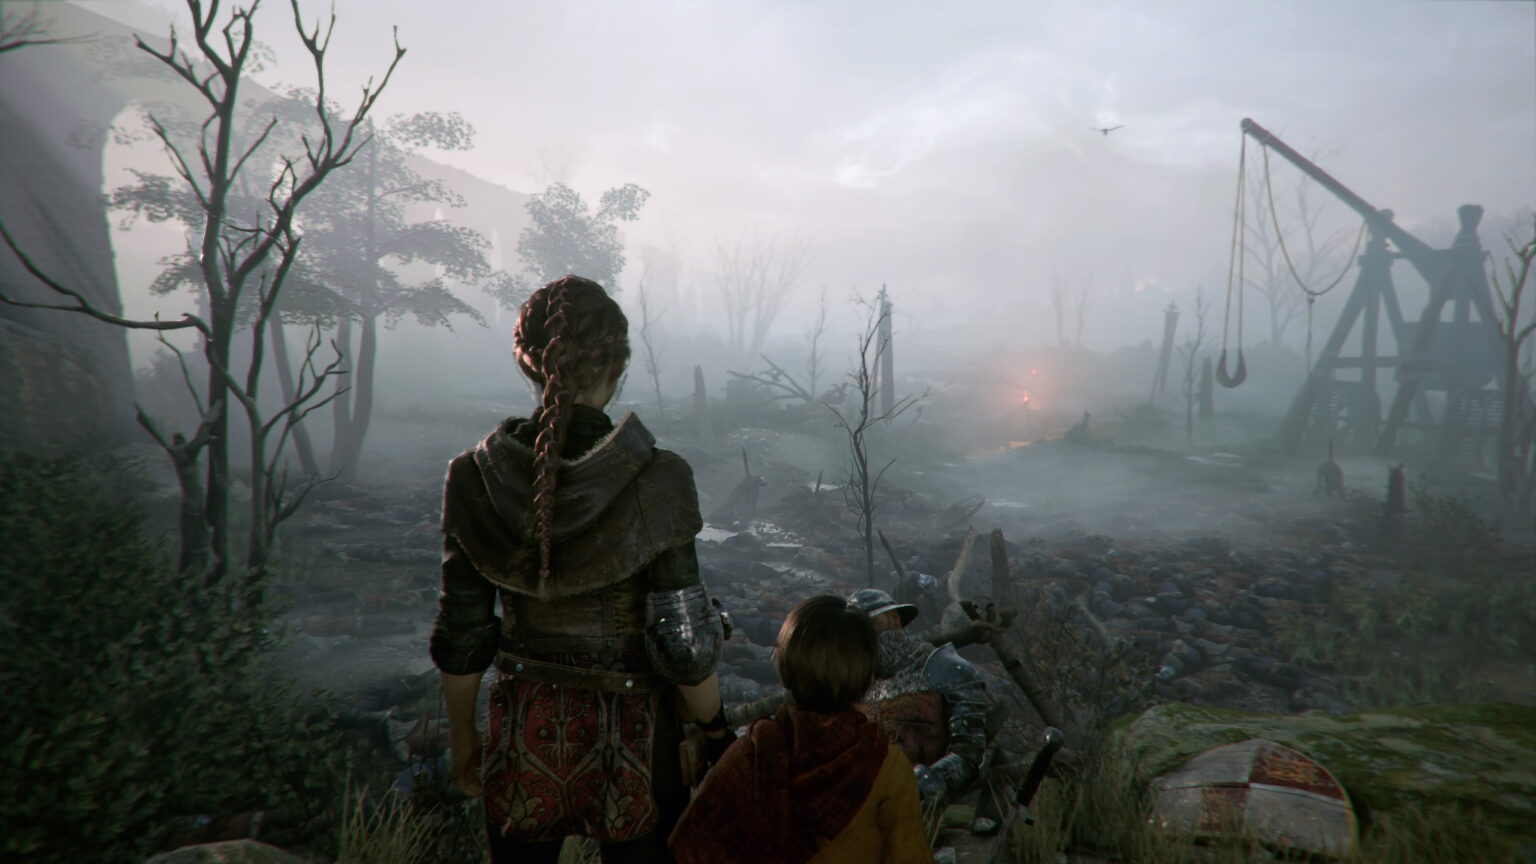 A Plague Tale: Requiem Gets New Gameplay Overview Trailer